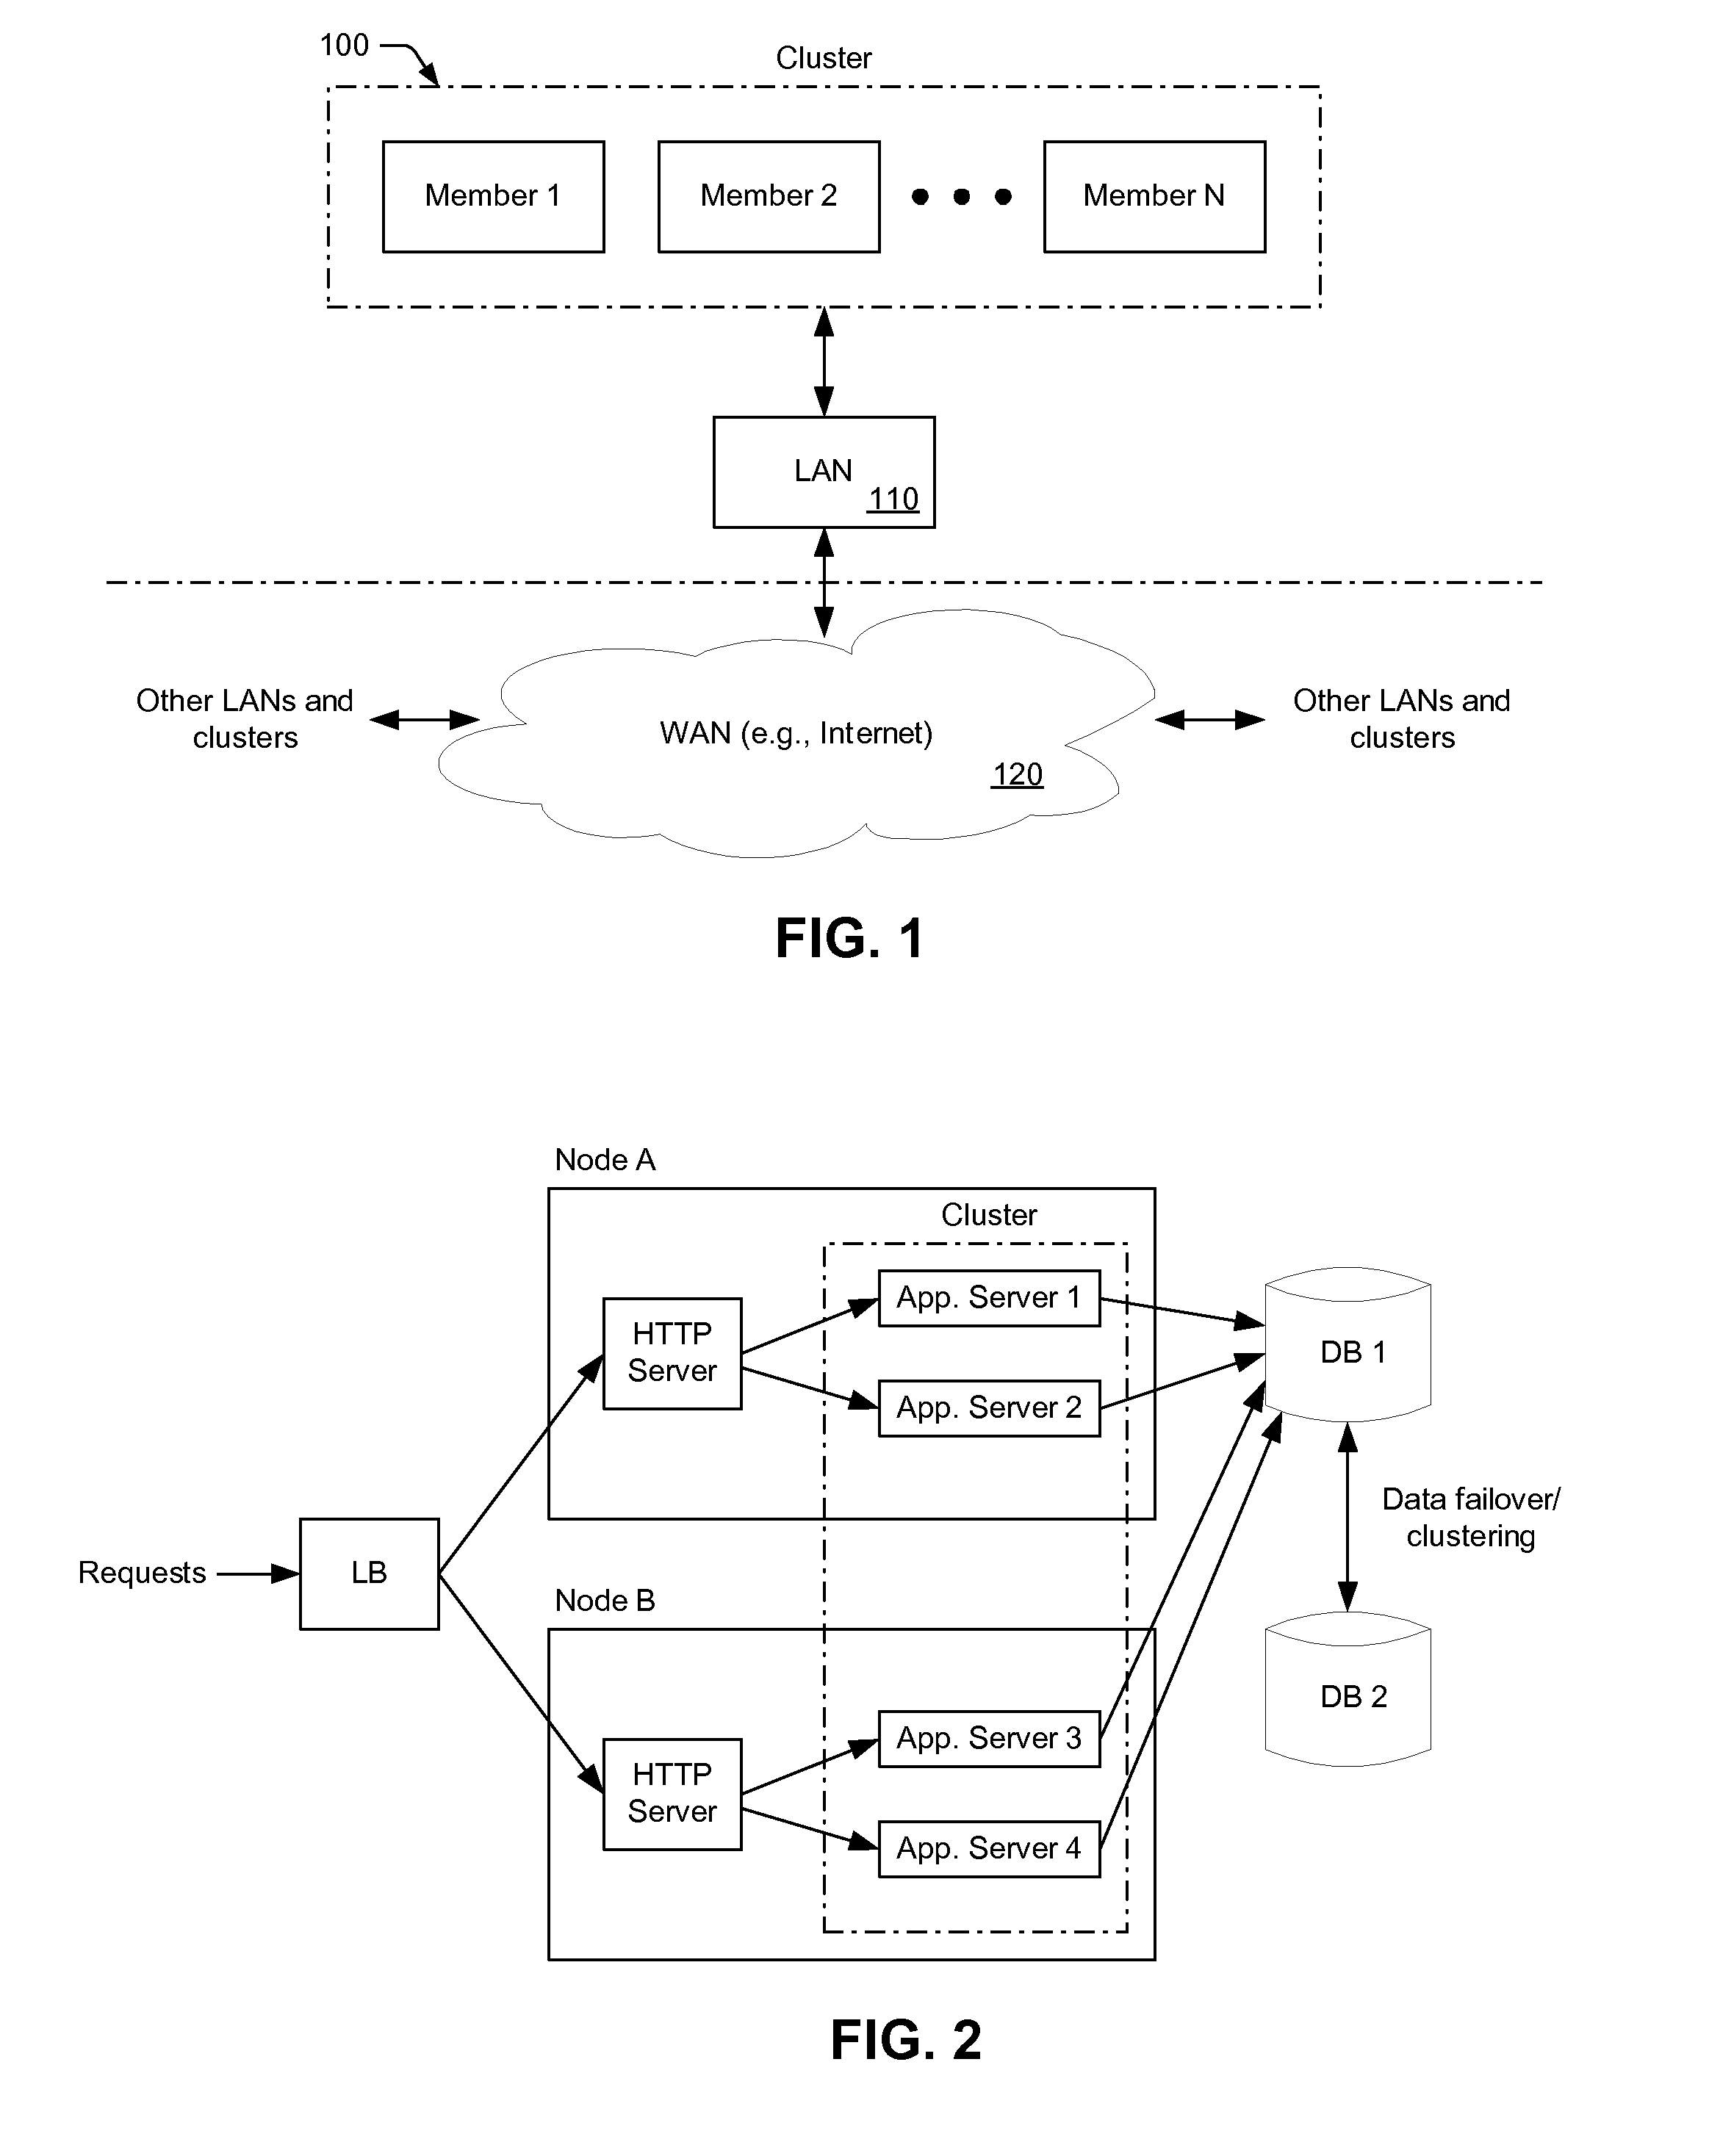 Method for Distributed Hierarchical Admission Control across a Cluster